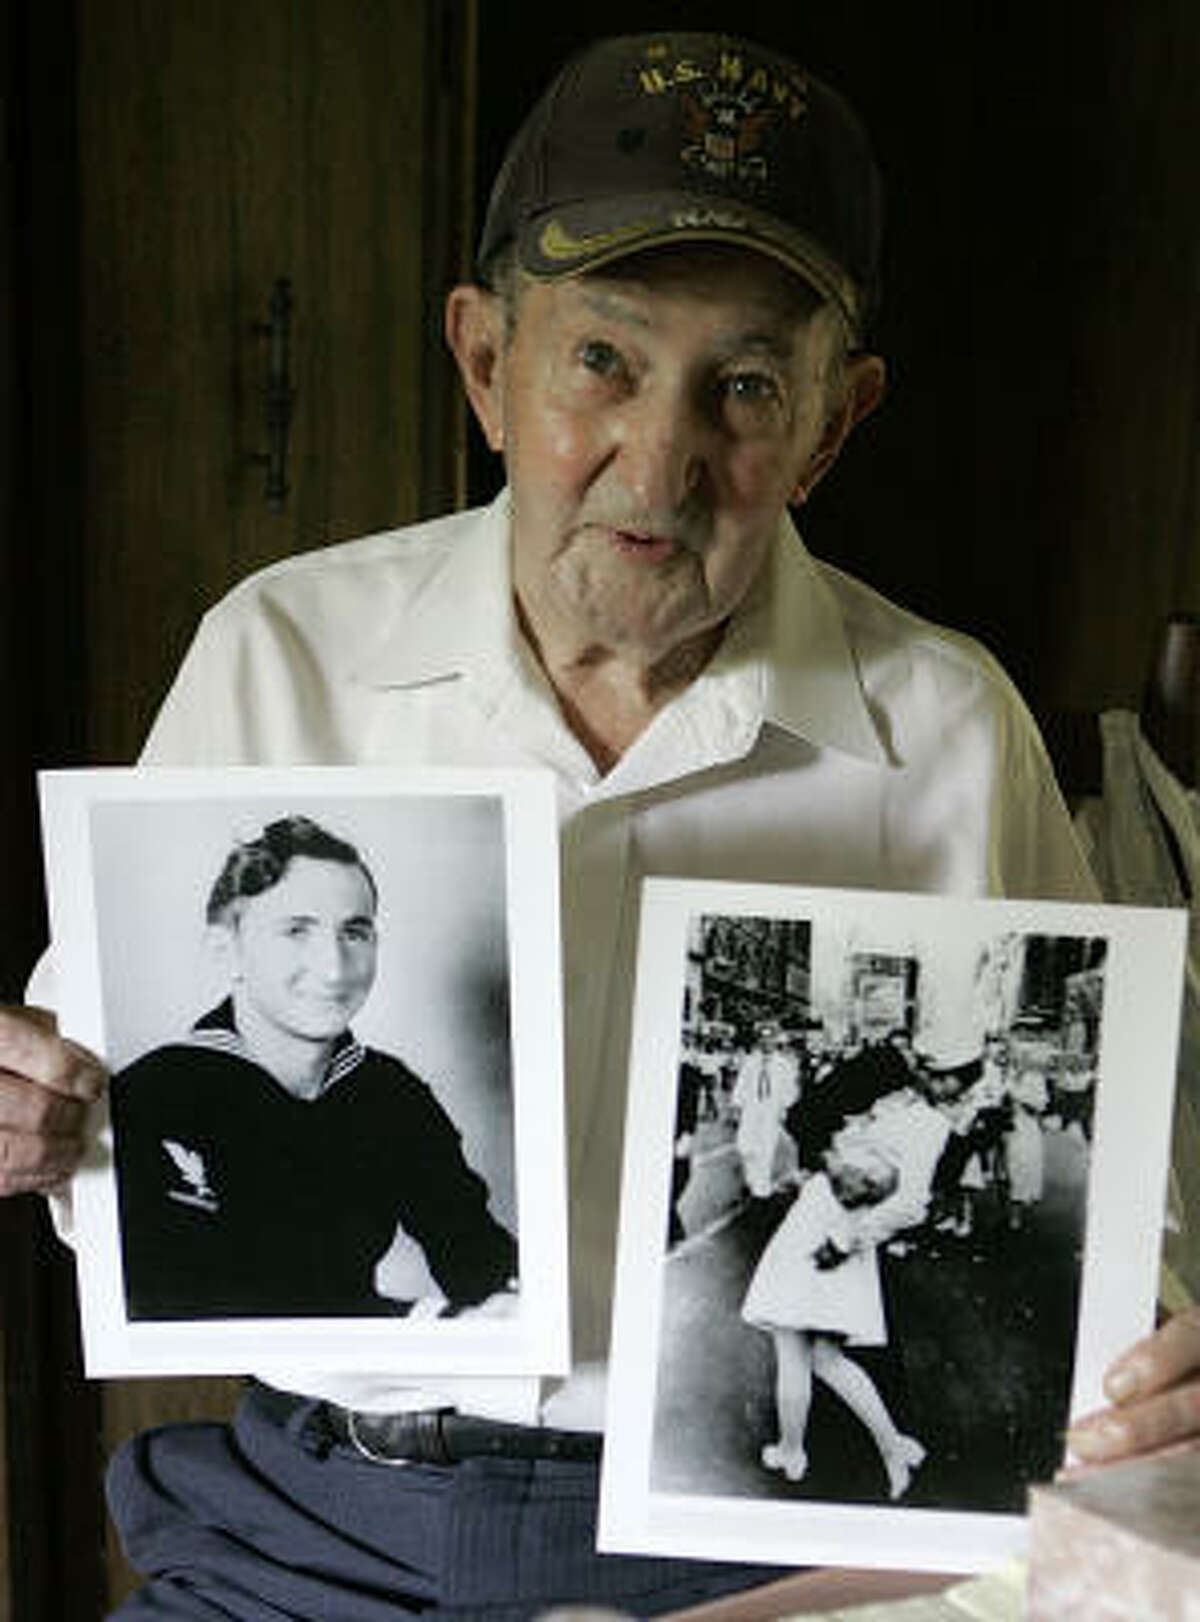 Glenn McDuffie holds a portrait of himself as a young man, left, and a copy of Alfred Eisenstaedt's iconic Life magazine shot of a sailor embracing a nurse. McDuffie says he is the sailor in the photo.